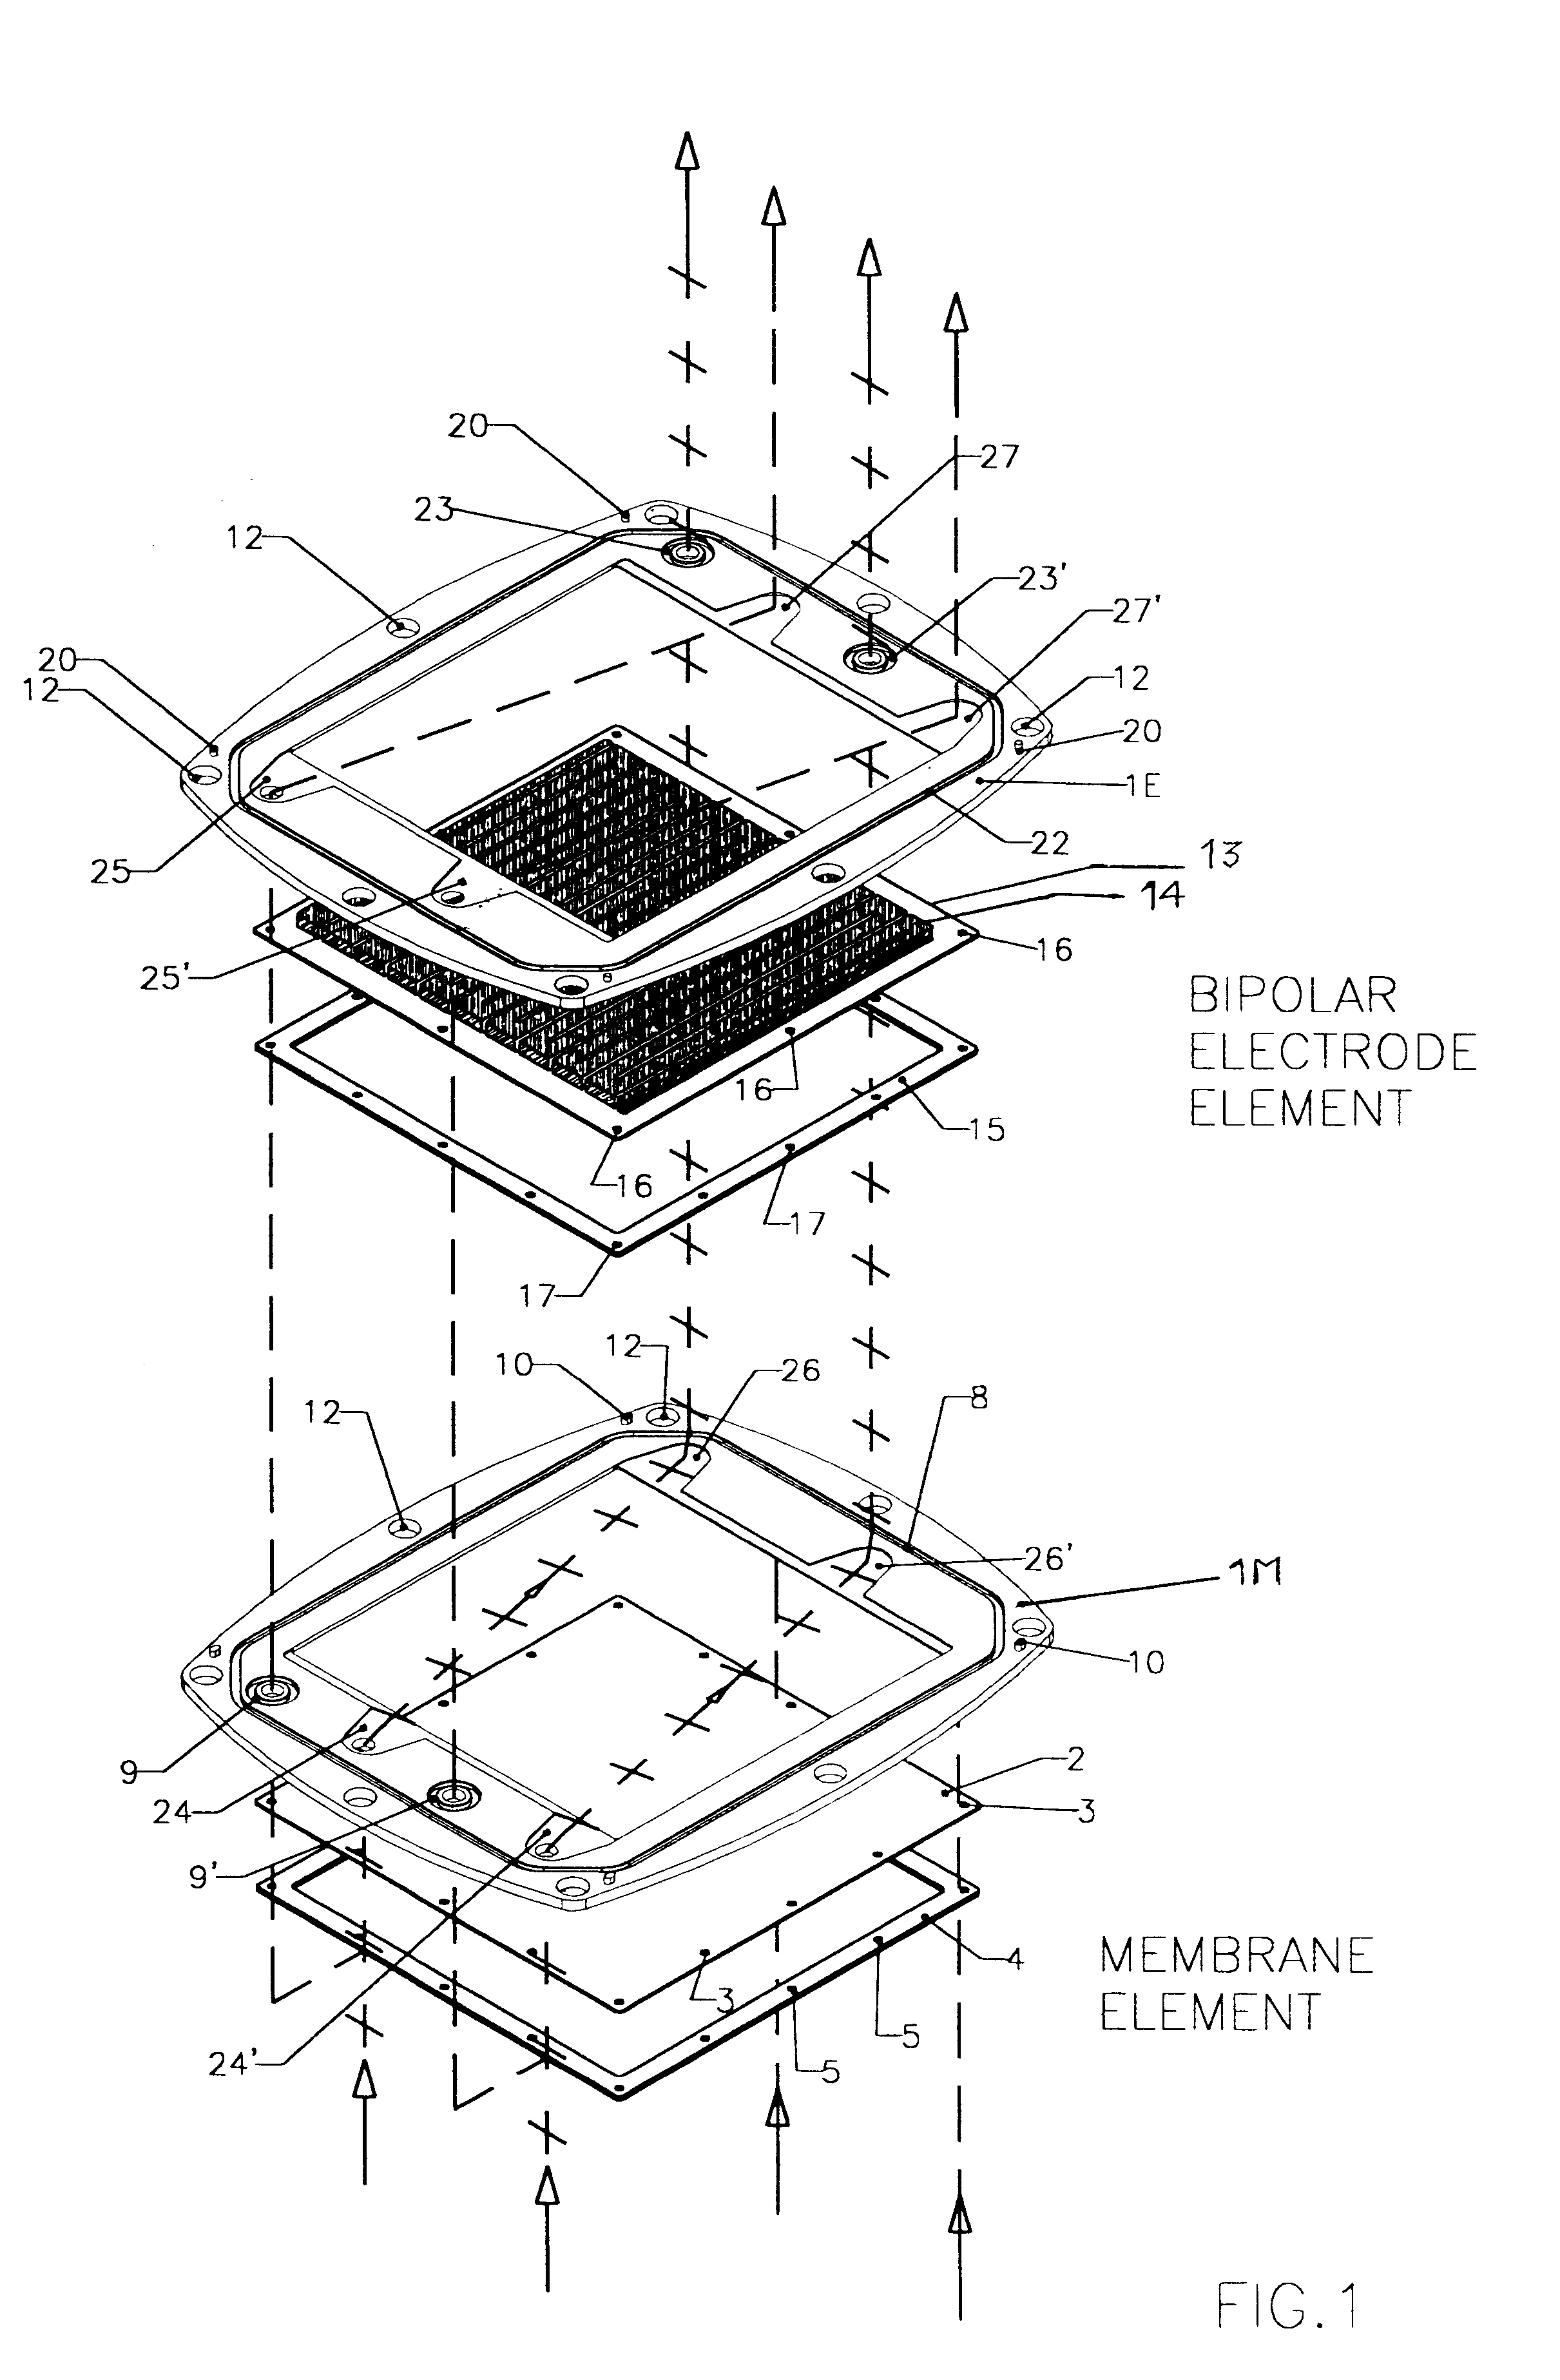 Membrane-separated, bipolar multicell electrochemical reactor